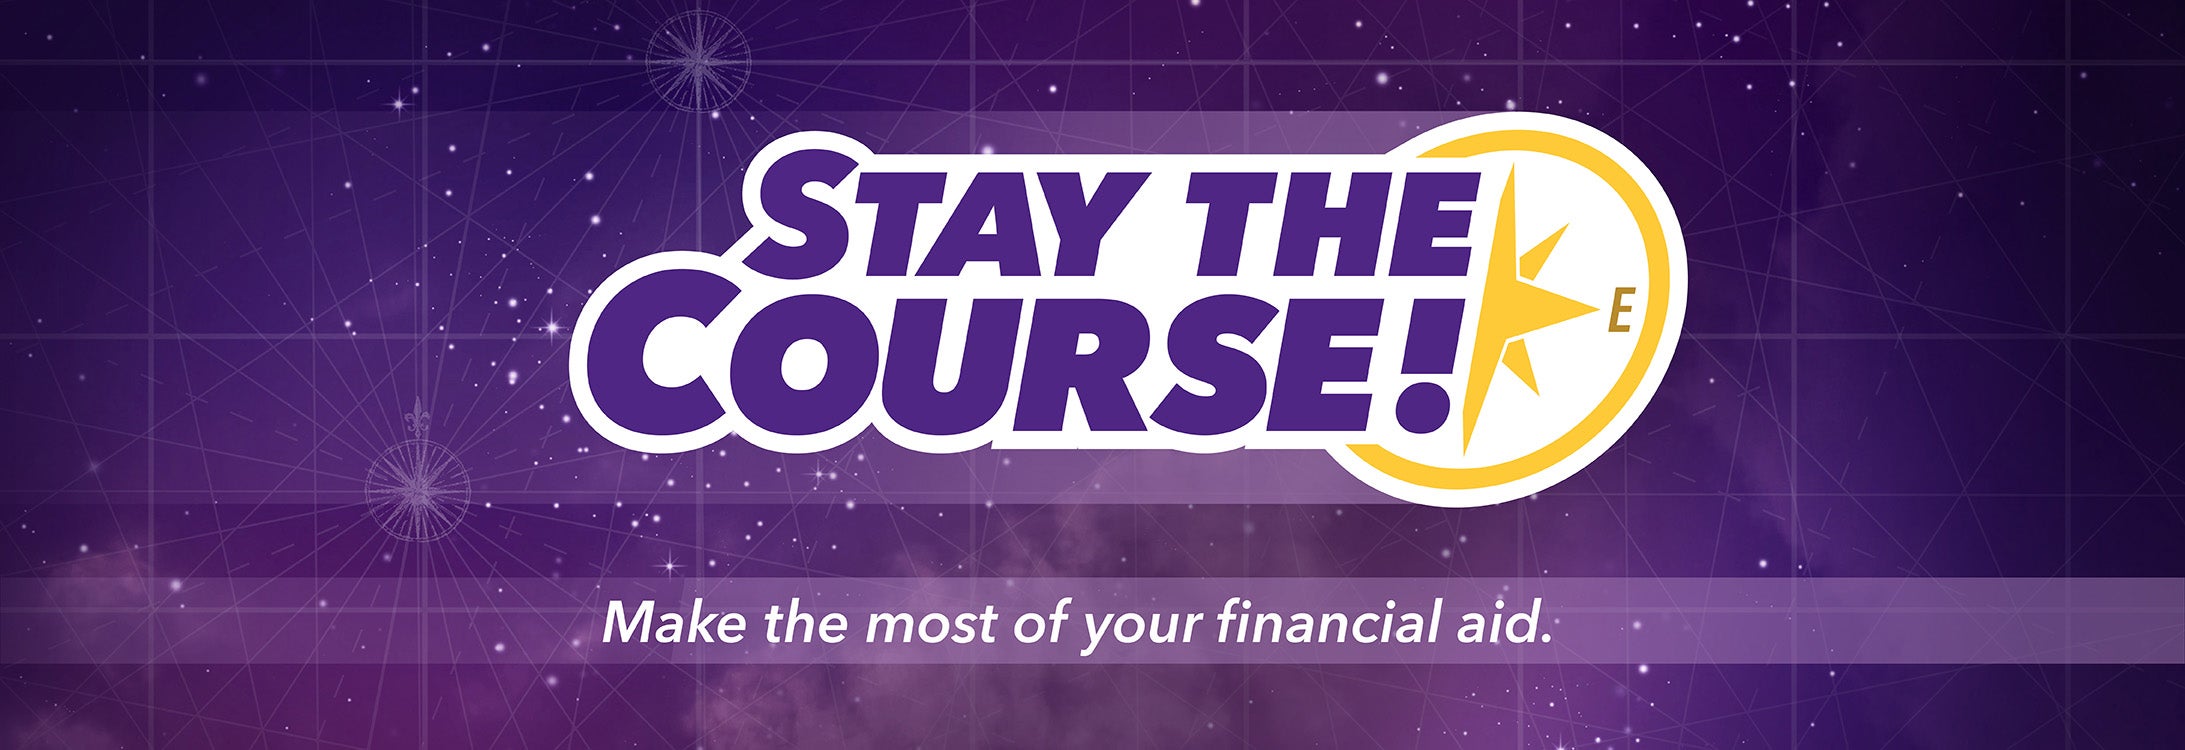 Stay the course! Make the most of your financial aid -Banner